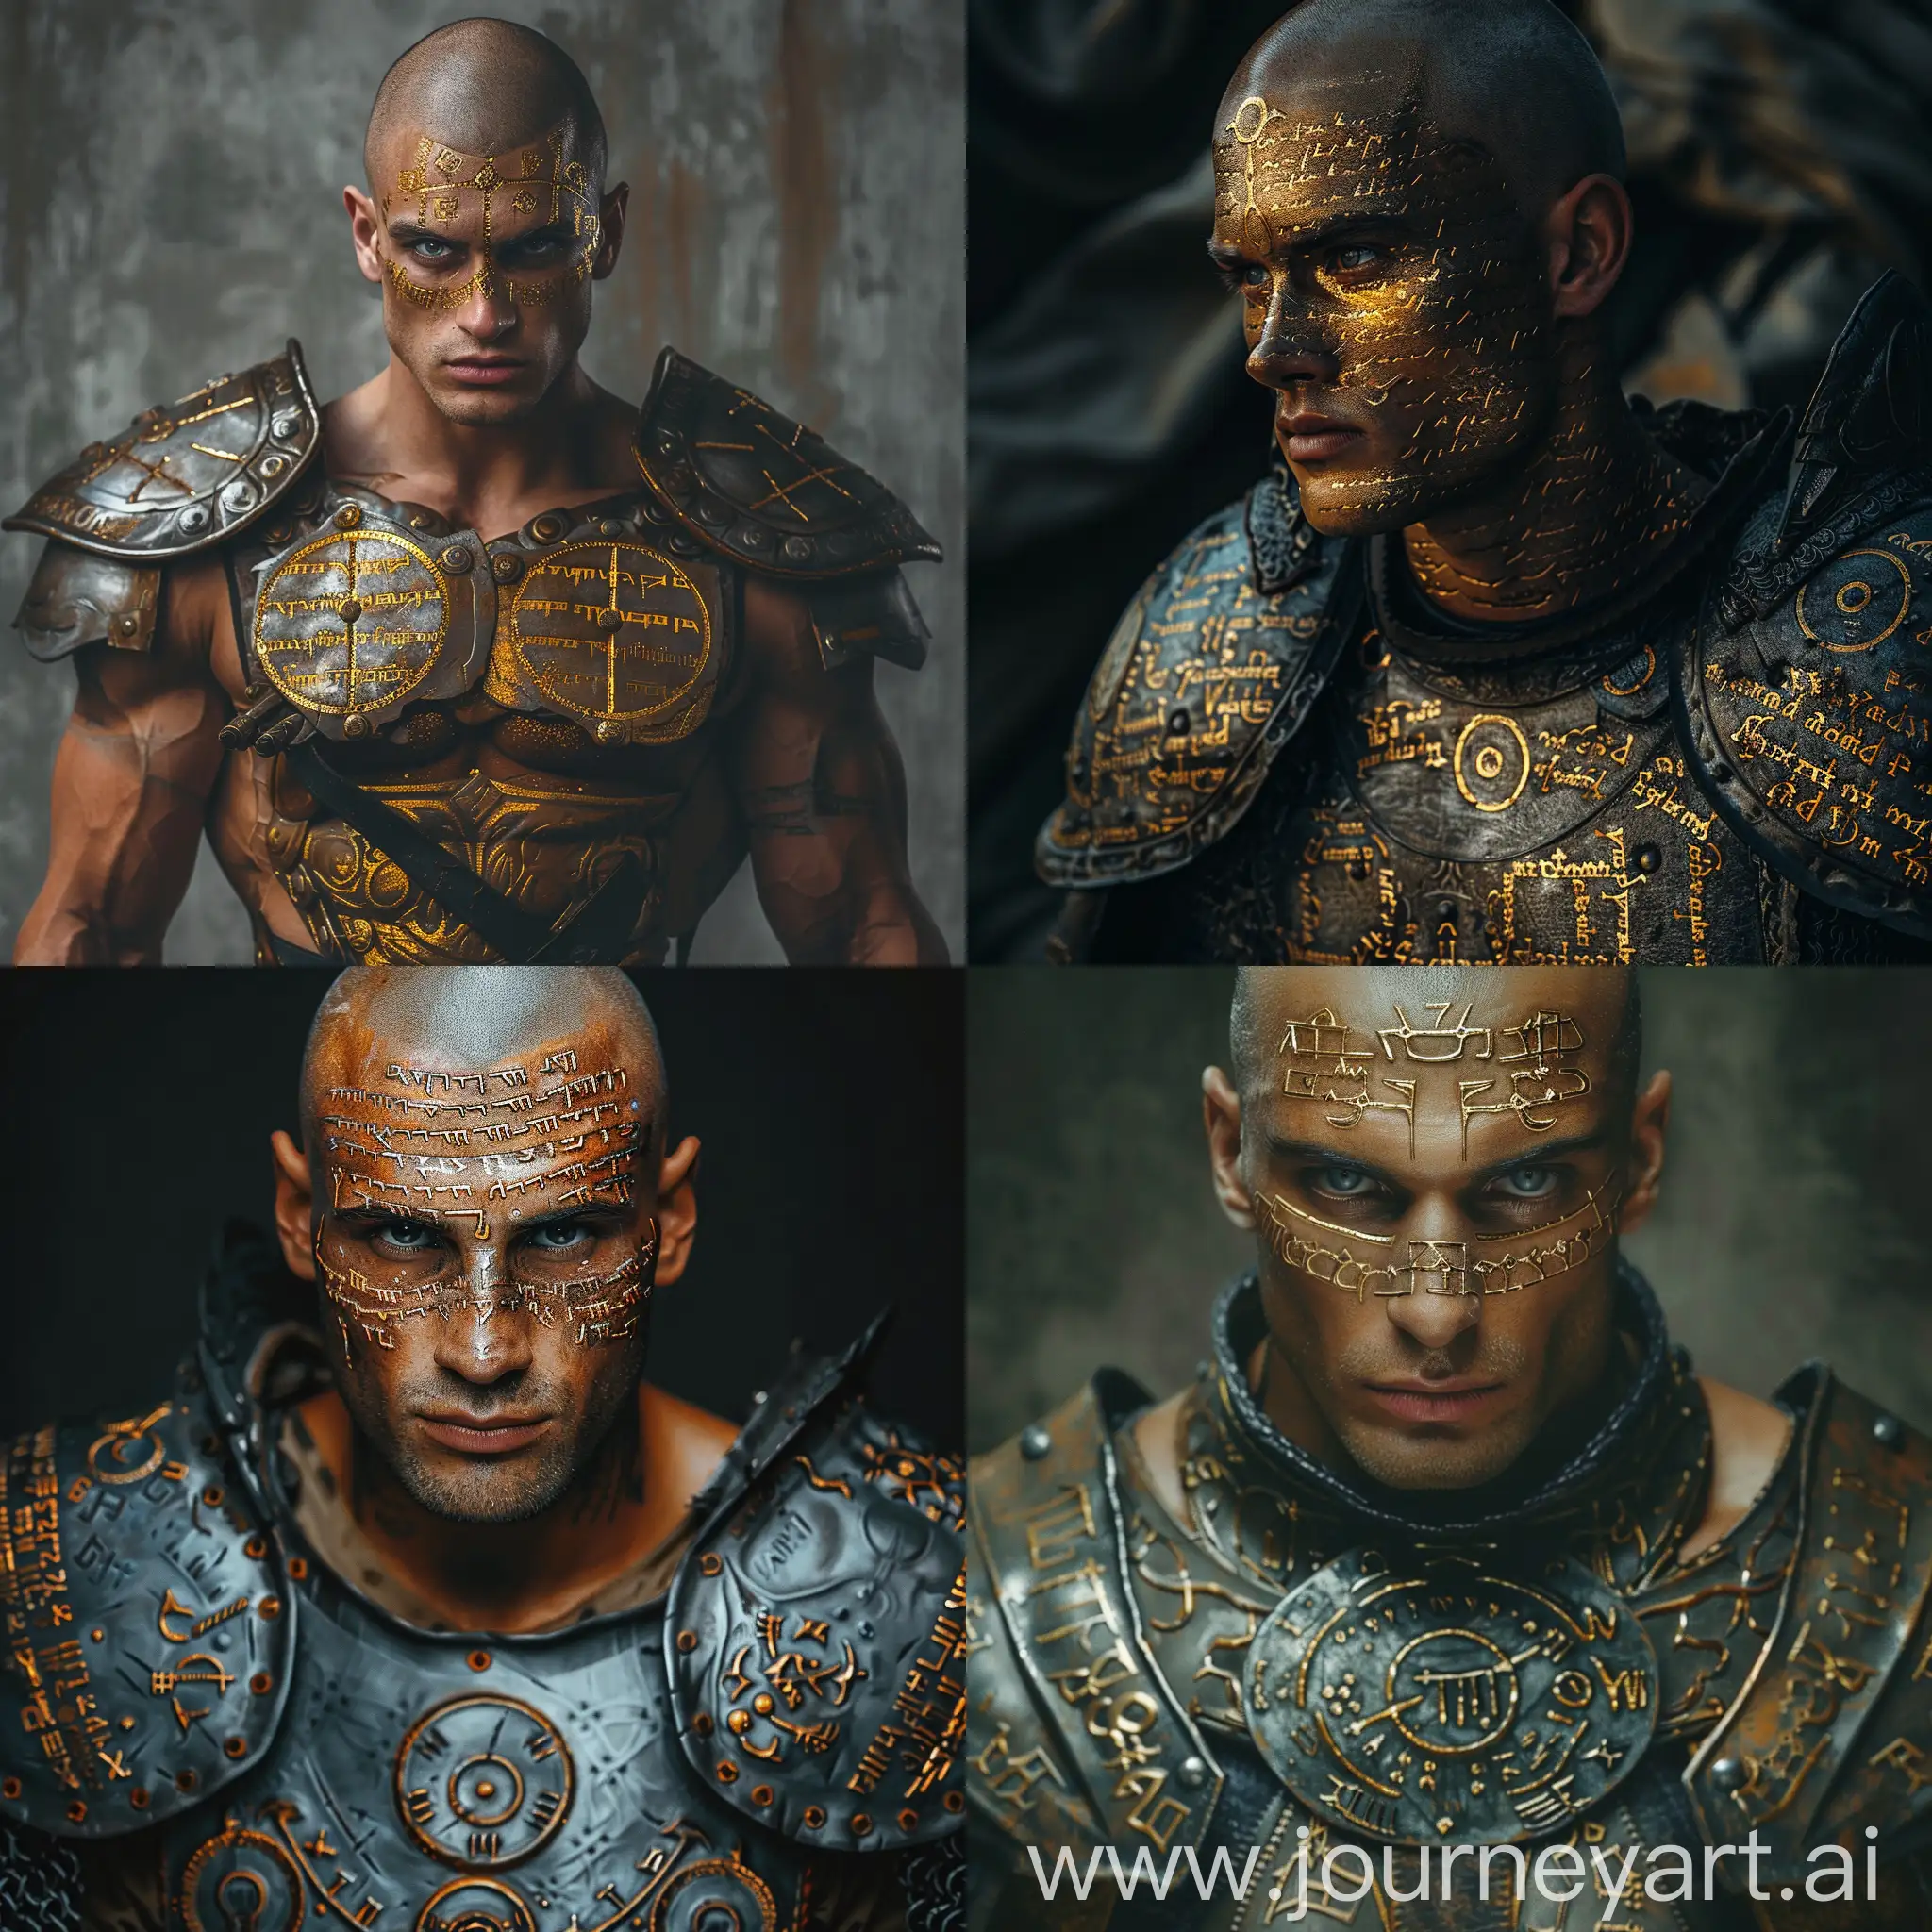 beautiful 30-years old man with perfect face features, golden tanned skin, lines of golden text on his body and face, muscular, completely bald and shaved, grey eyes, medieval, warrior priest armor, circle runes on armor 